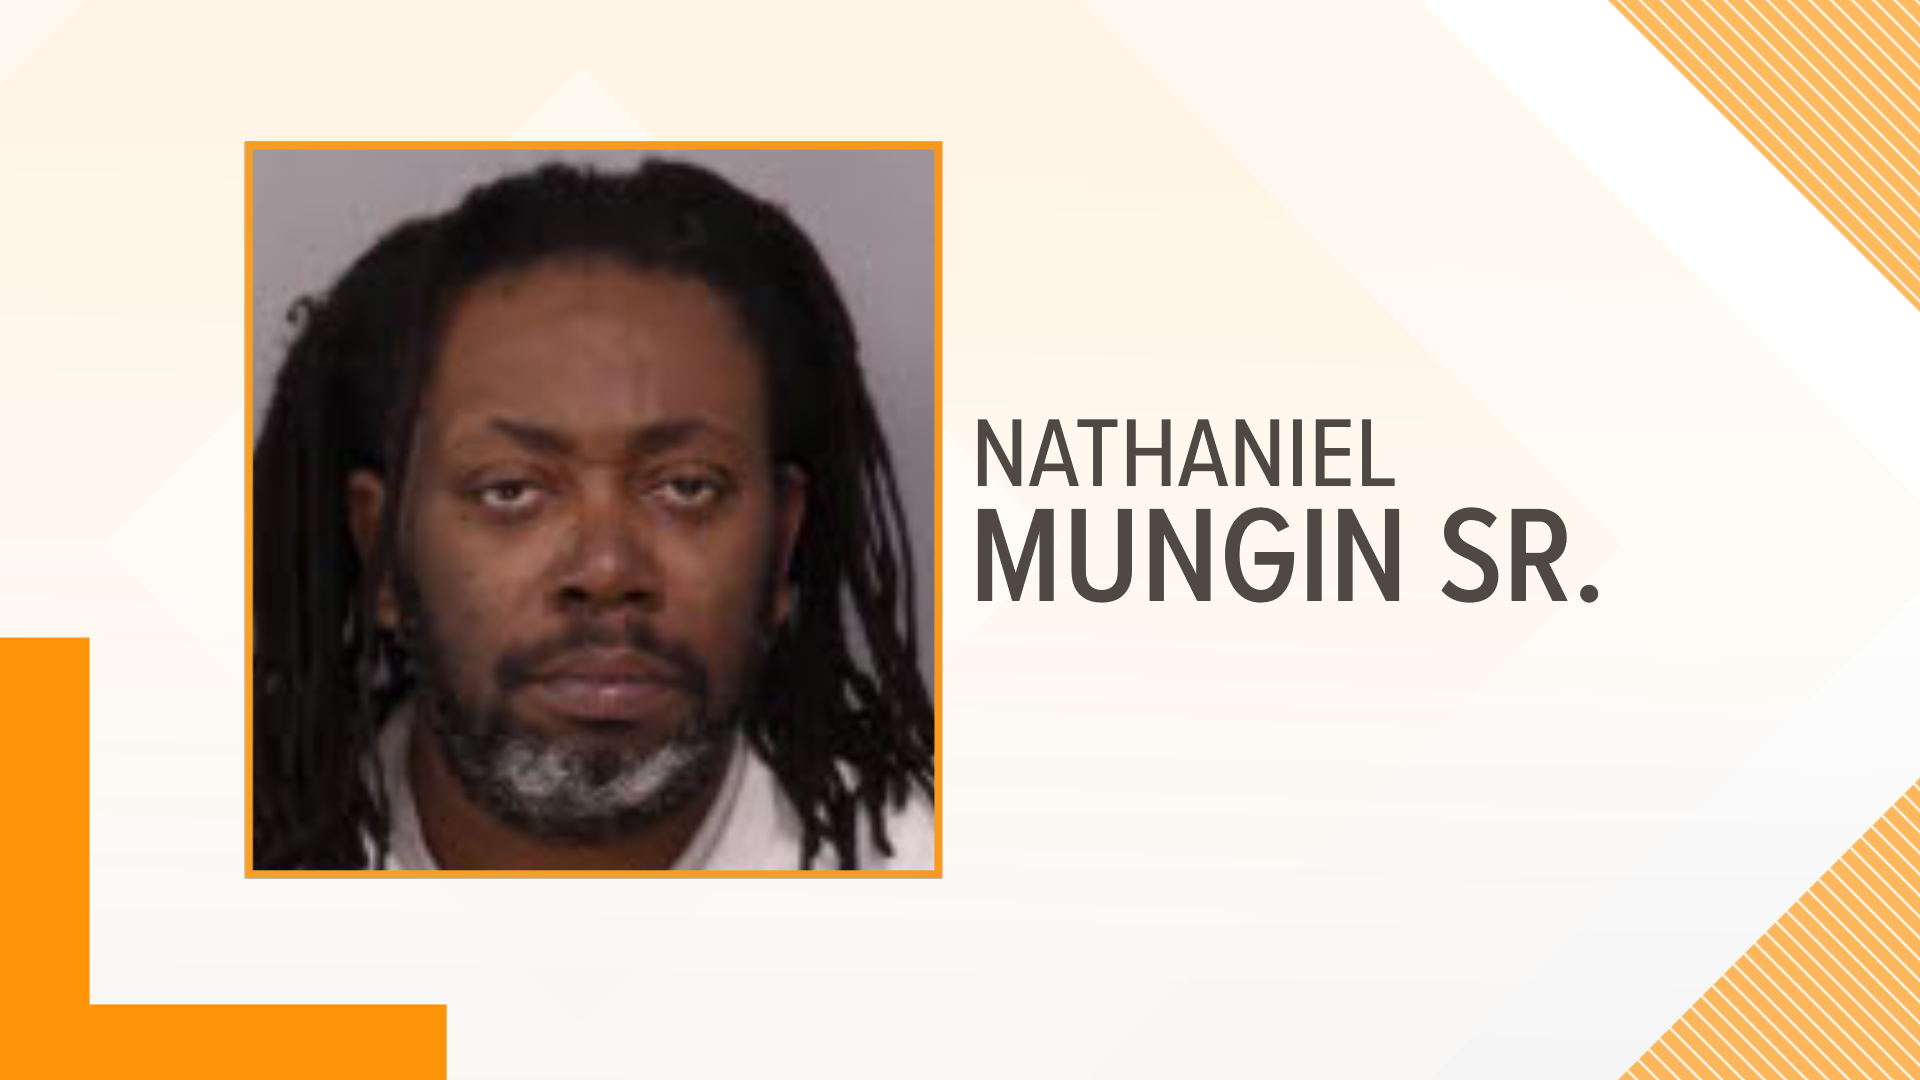 Scranton police arrested a man for his role in a shooting in the city.